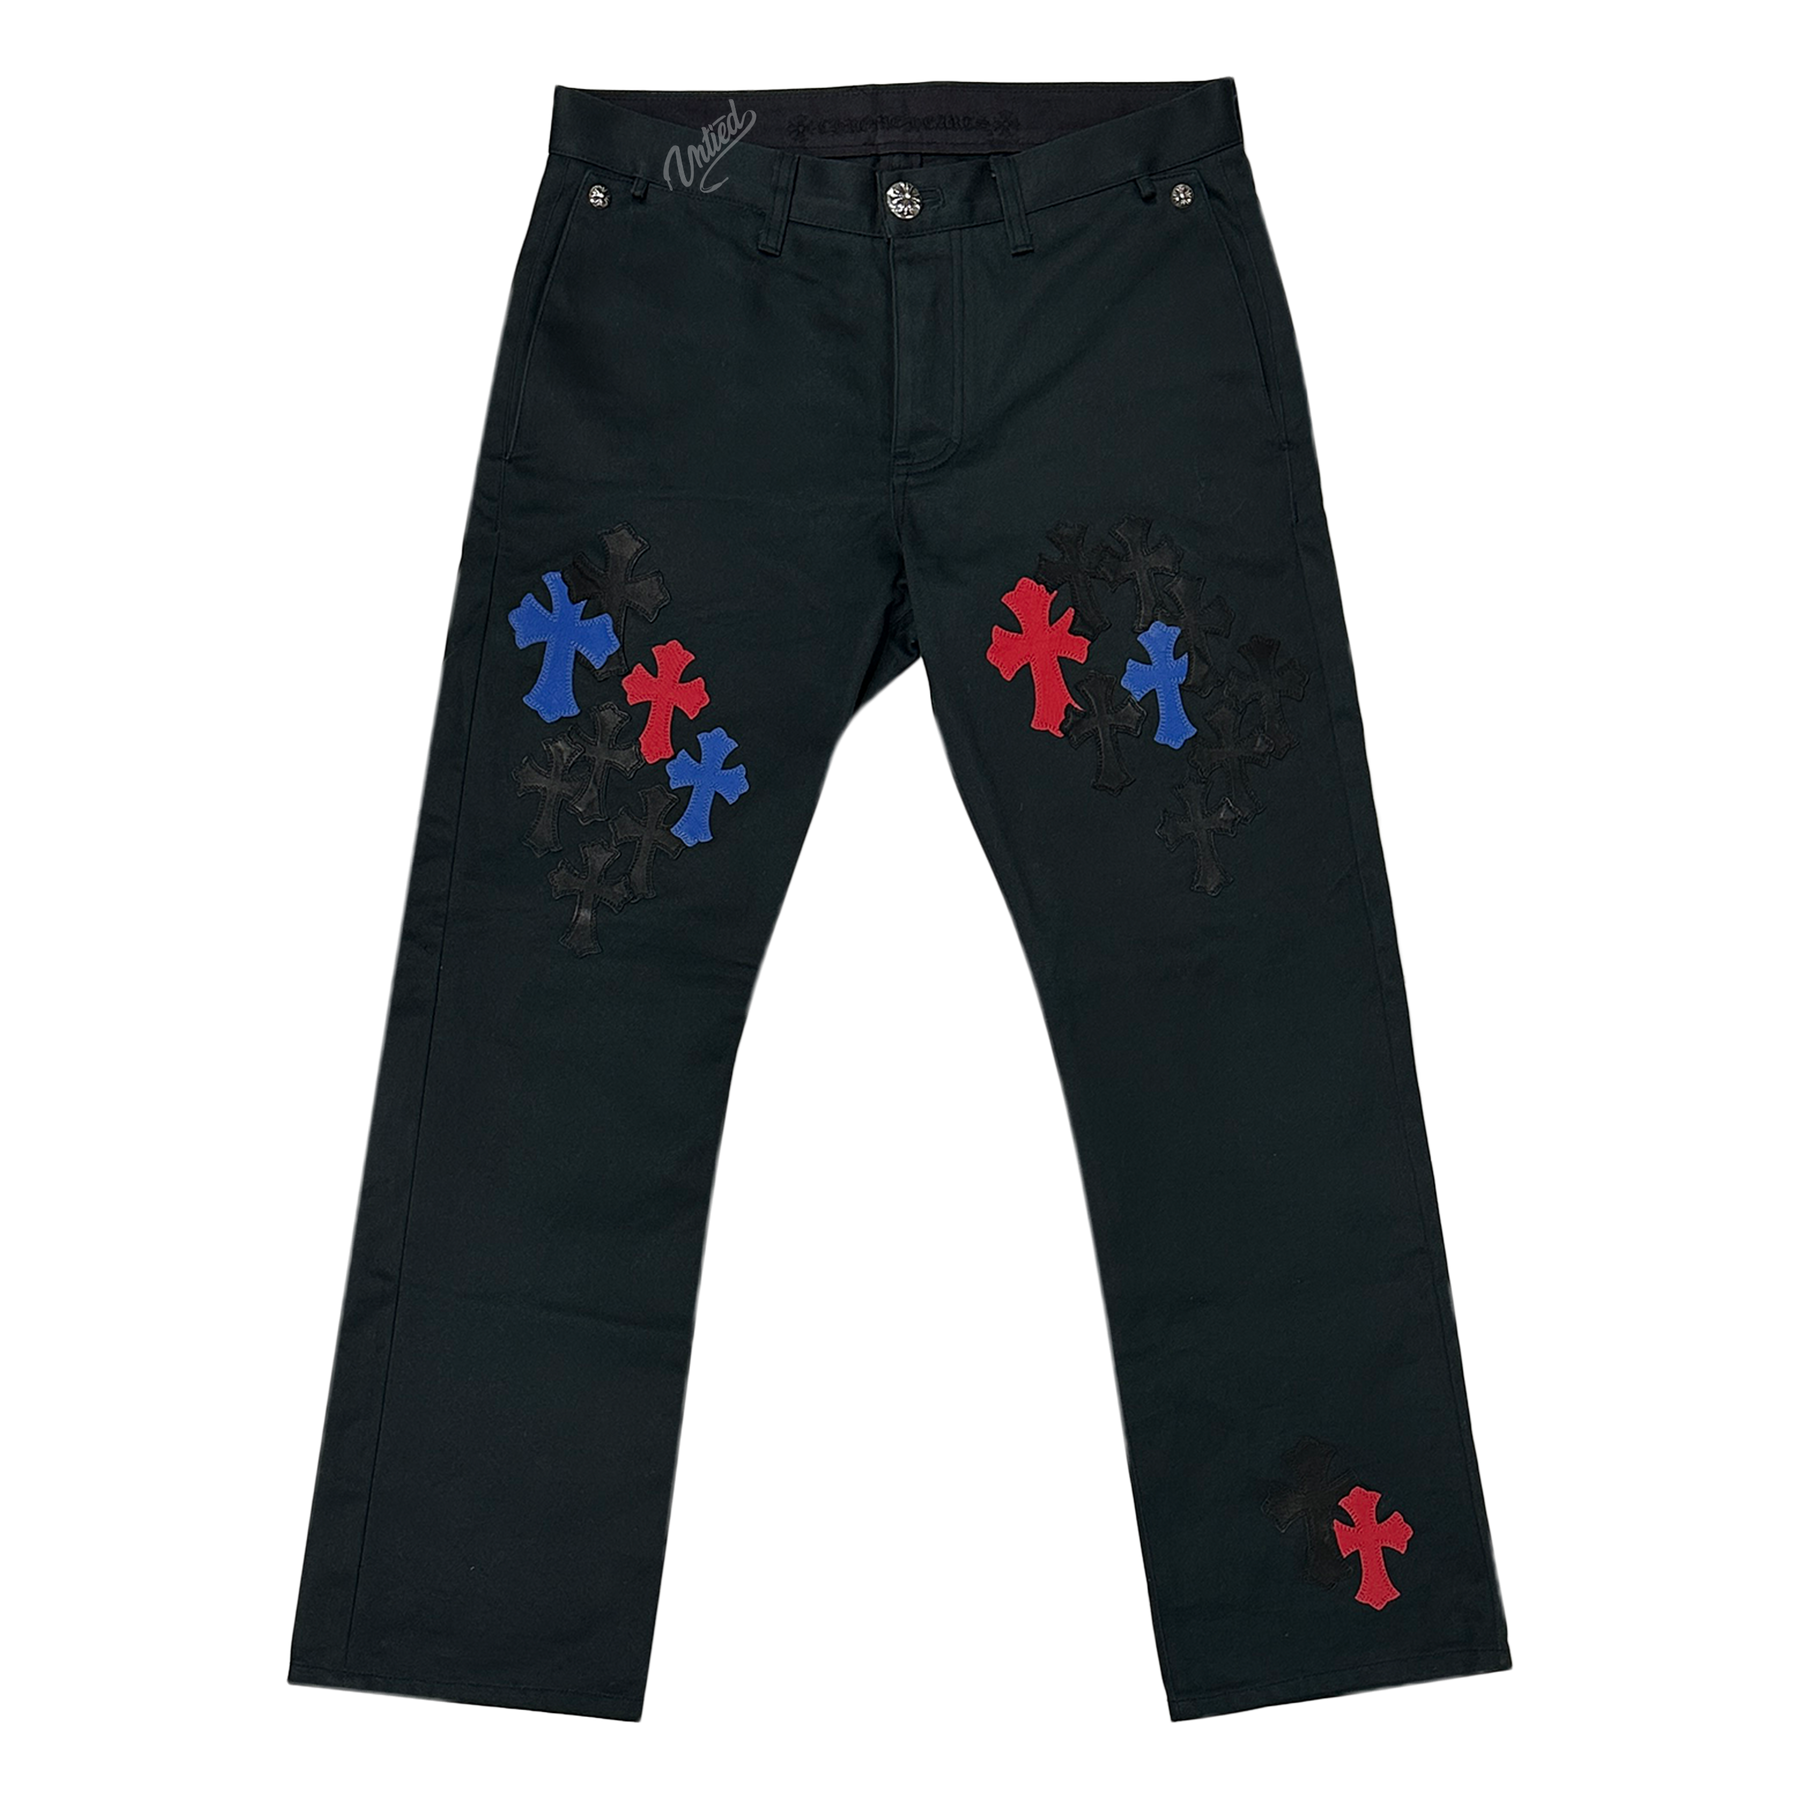 Chrome Hearts Multicolor Cross Patch Chino Pants Black/Red/Blue/Black